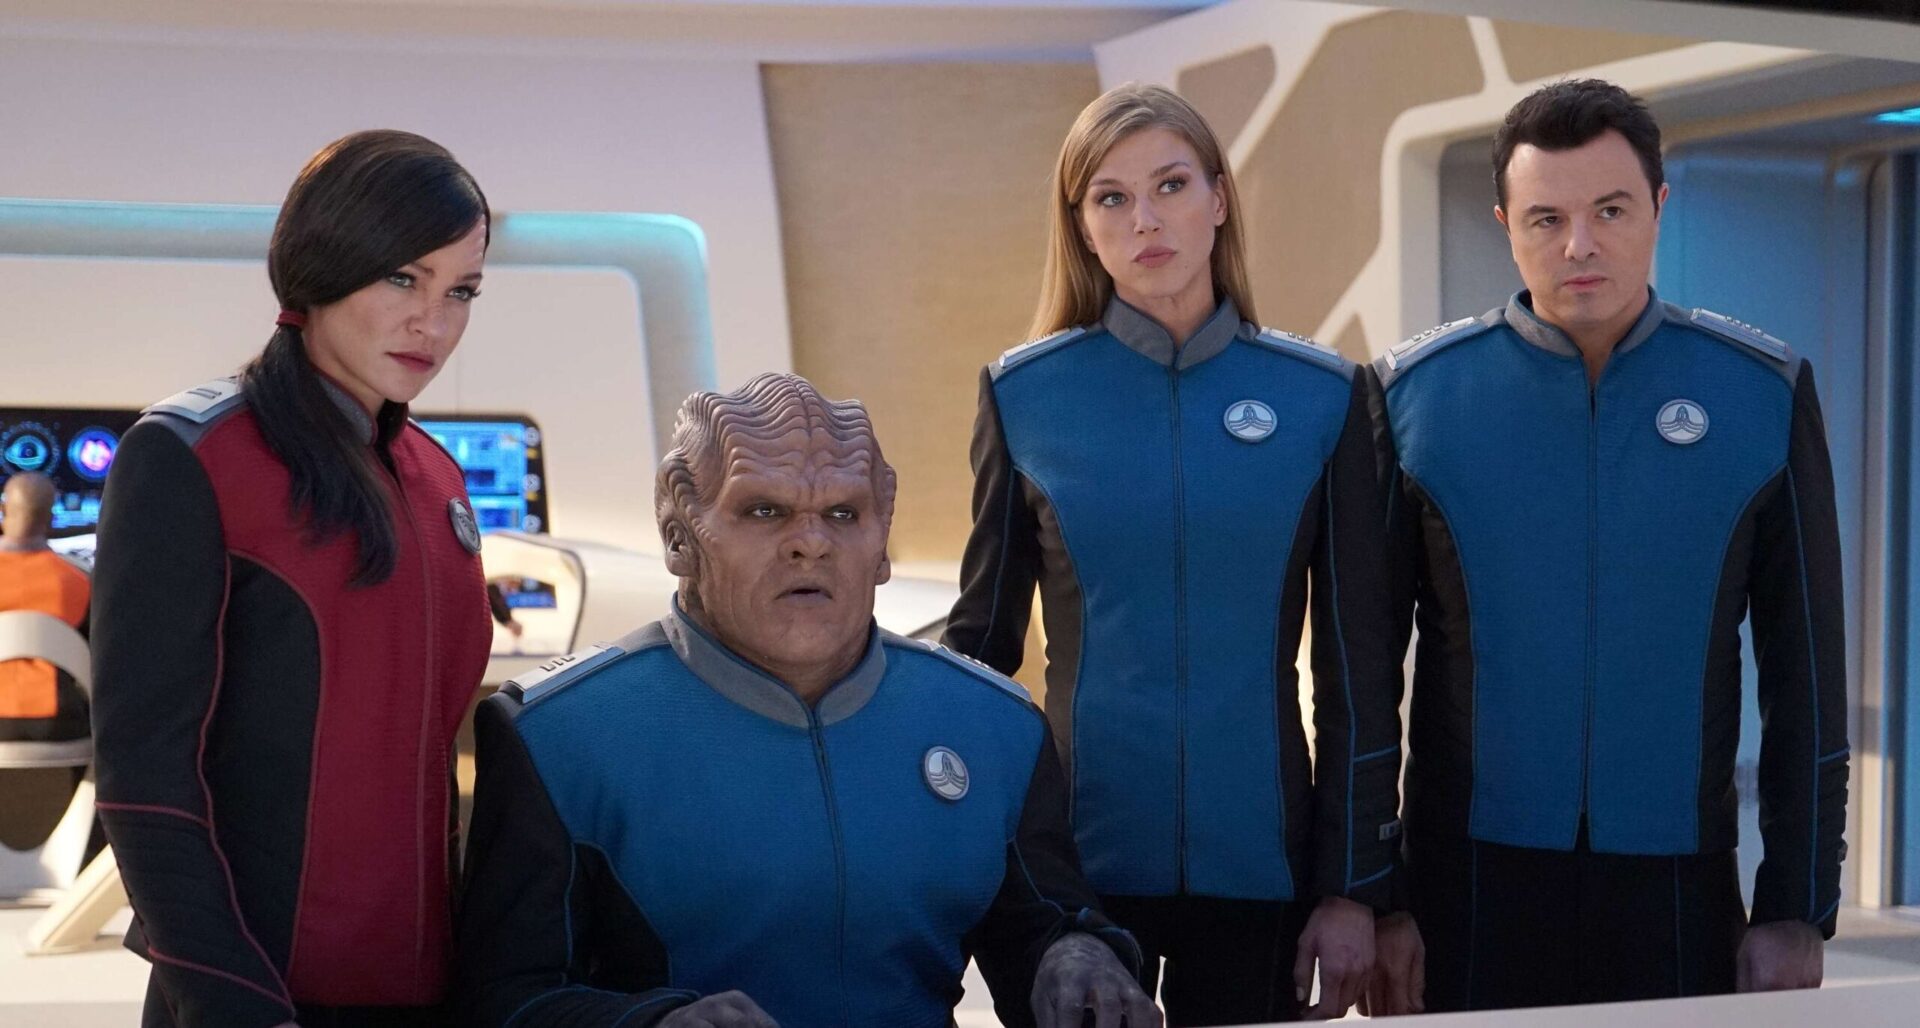 Hulu’s “The Orville: New Horizons” Shares Sneak Peek and New Premiere Date